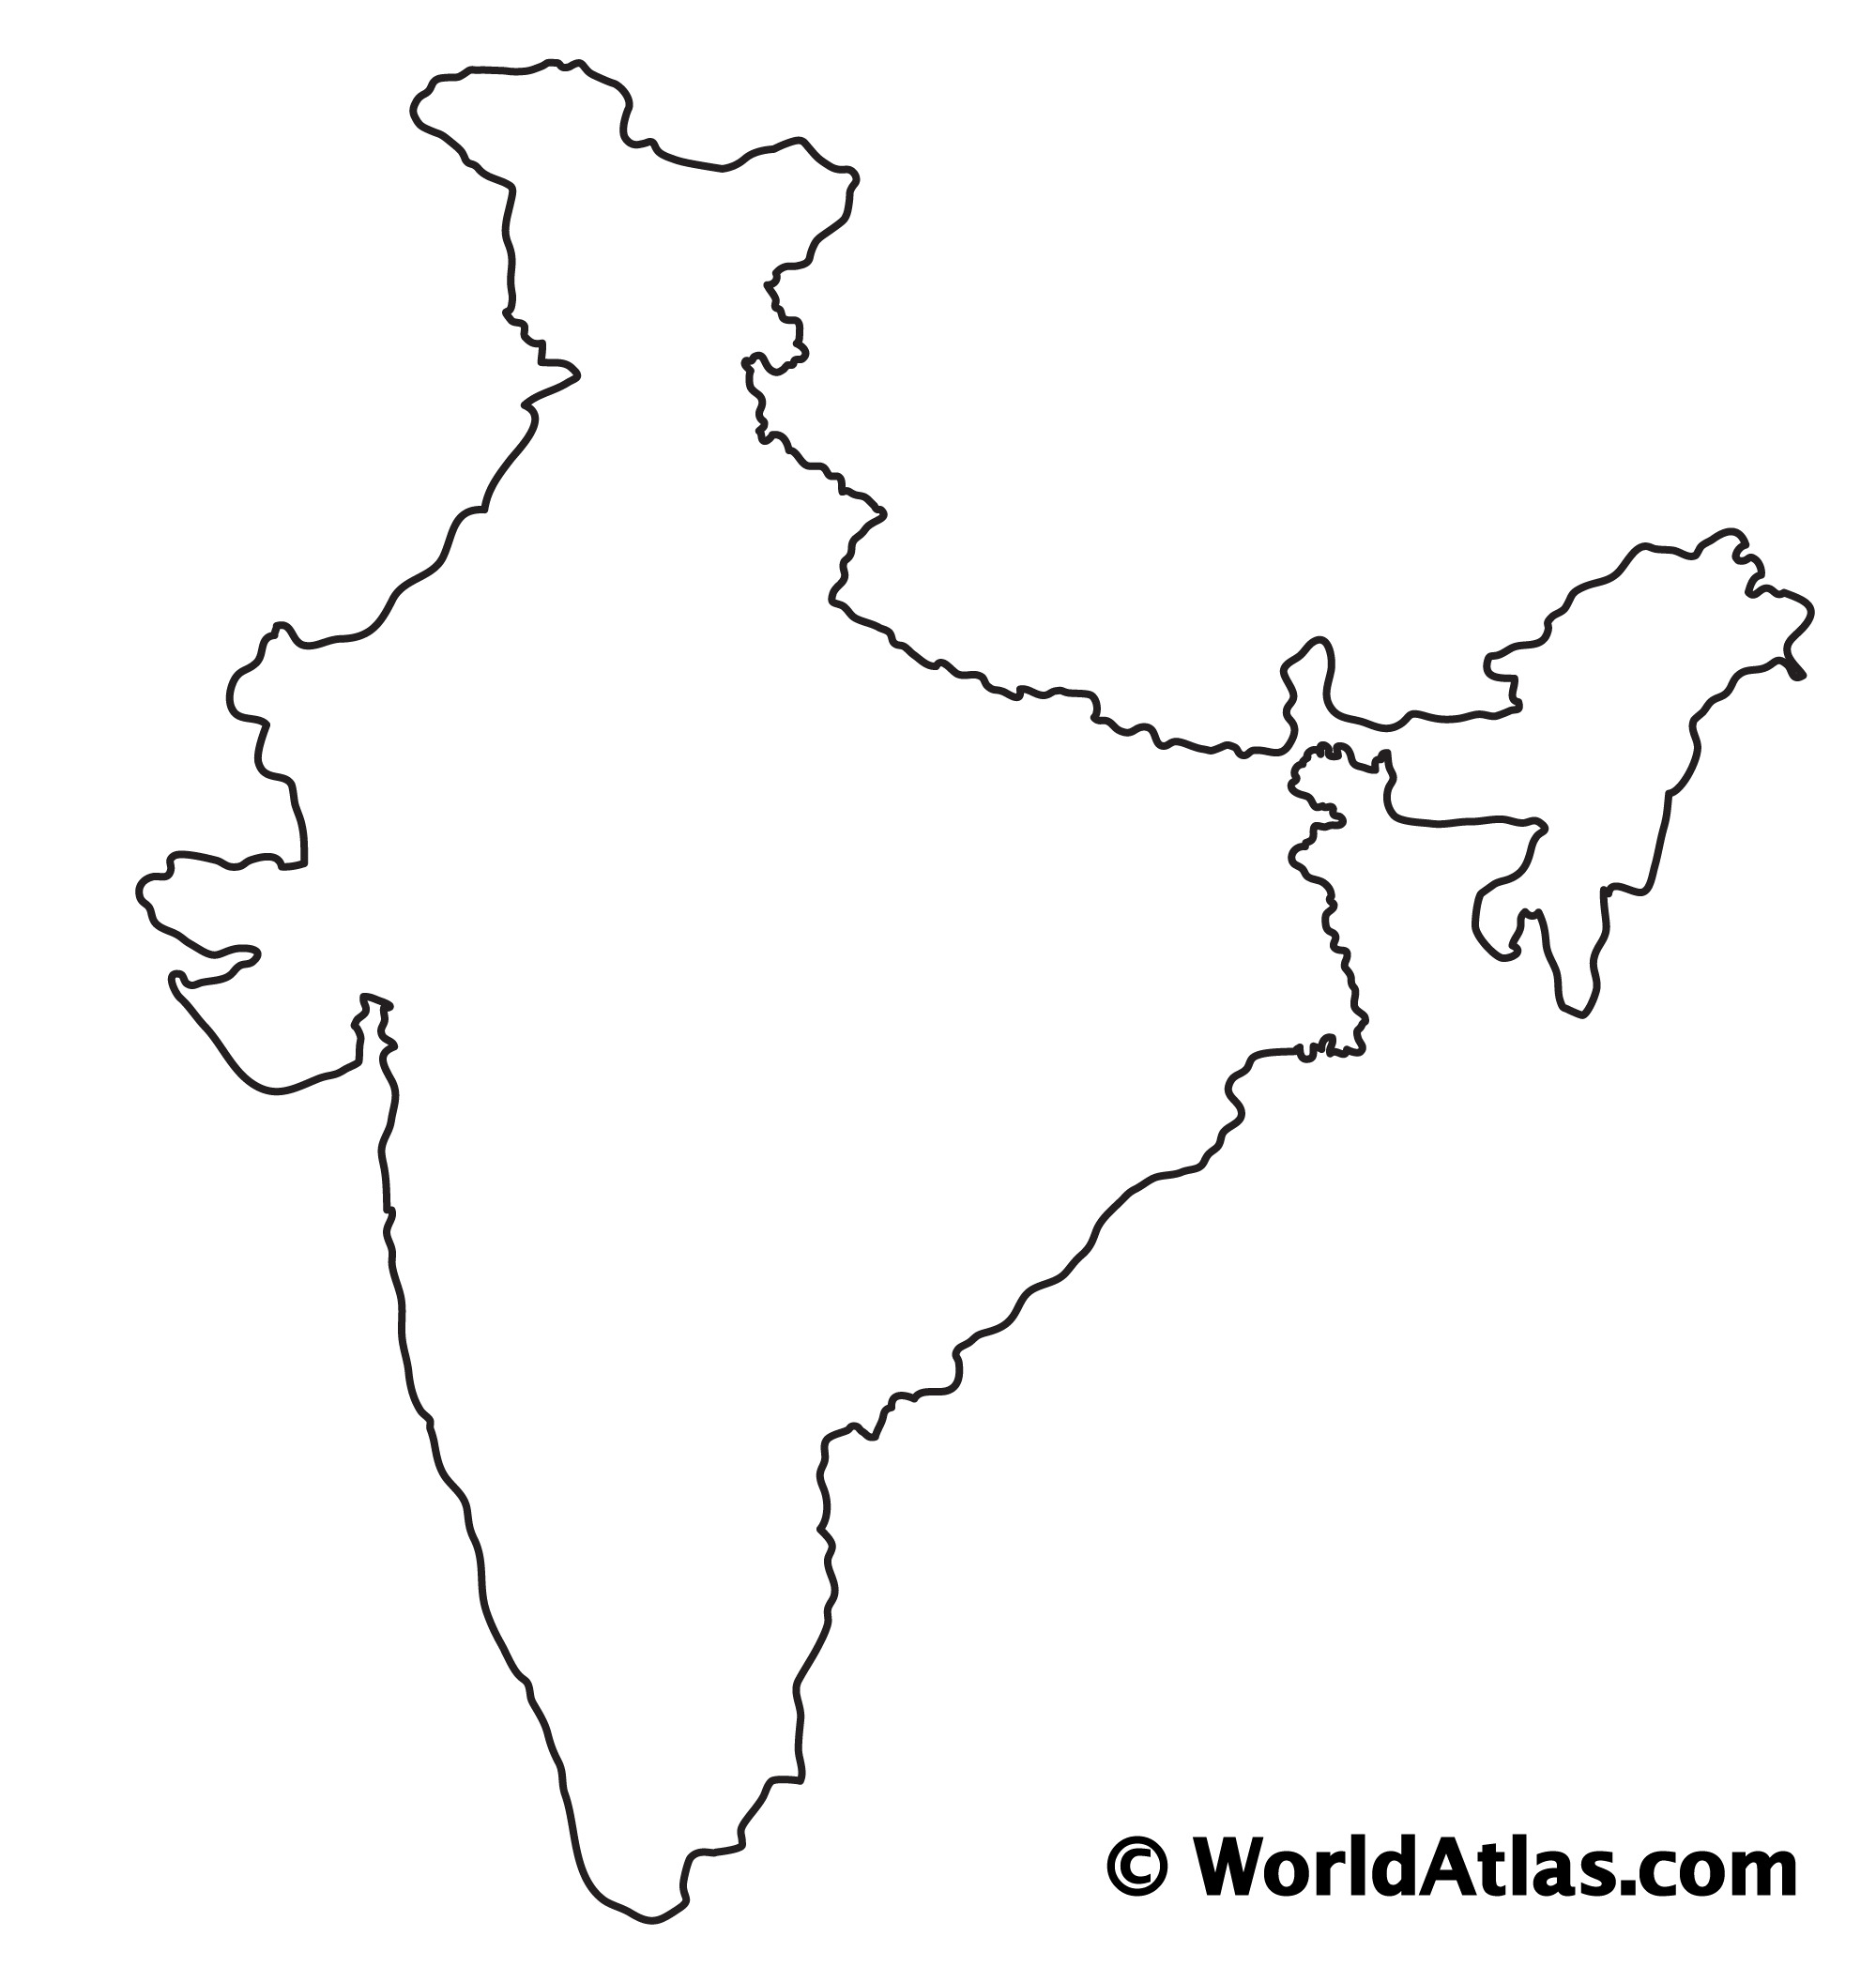 India Map Outline Images - Free Download on Freepik